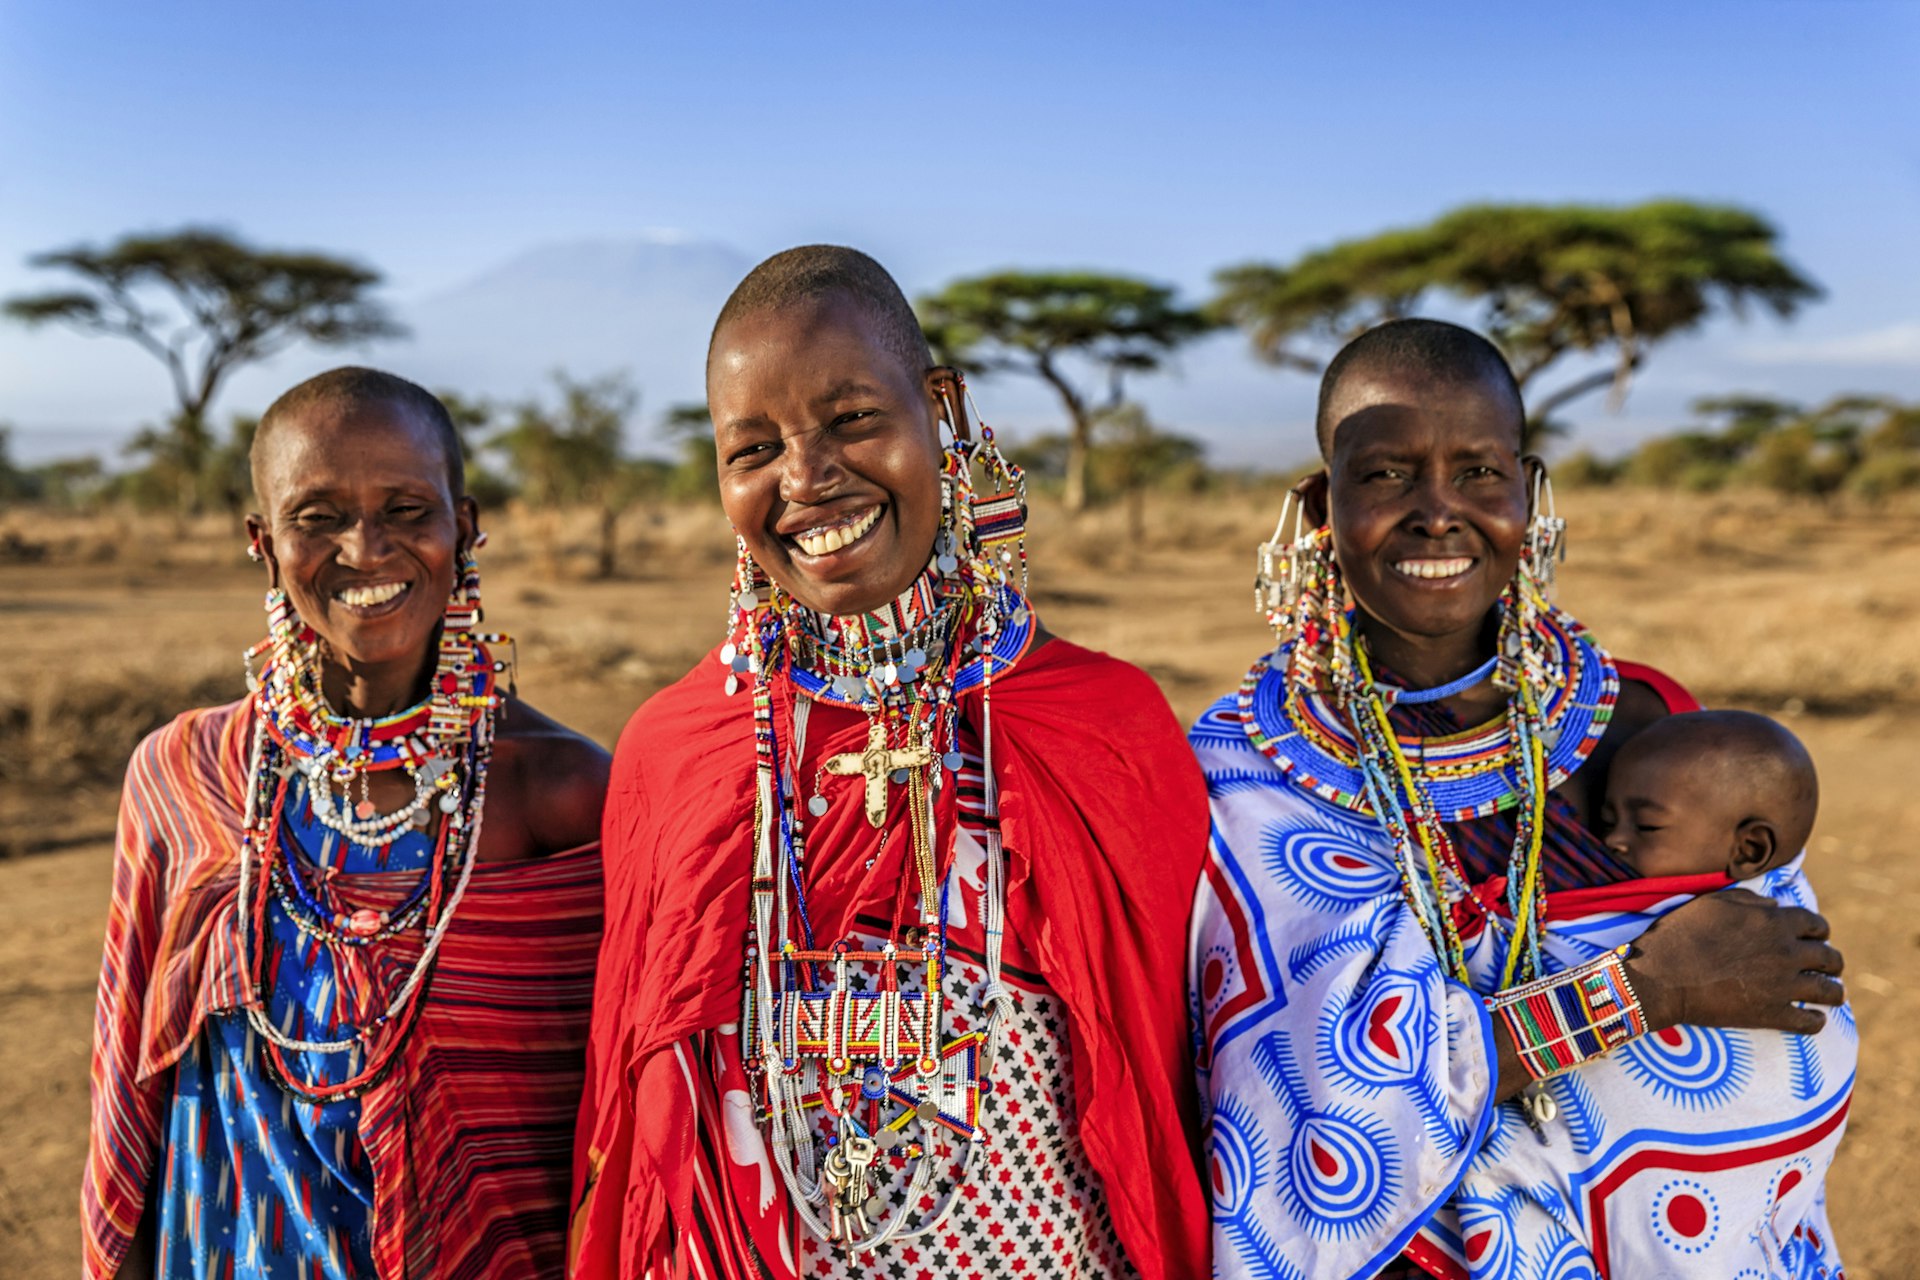 Three smiling Maasai women in colorful prints, one is holding a small baby